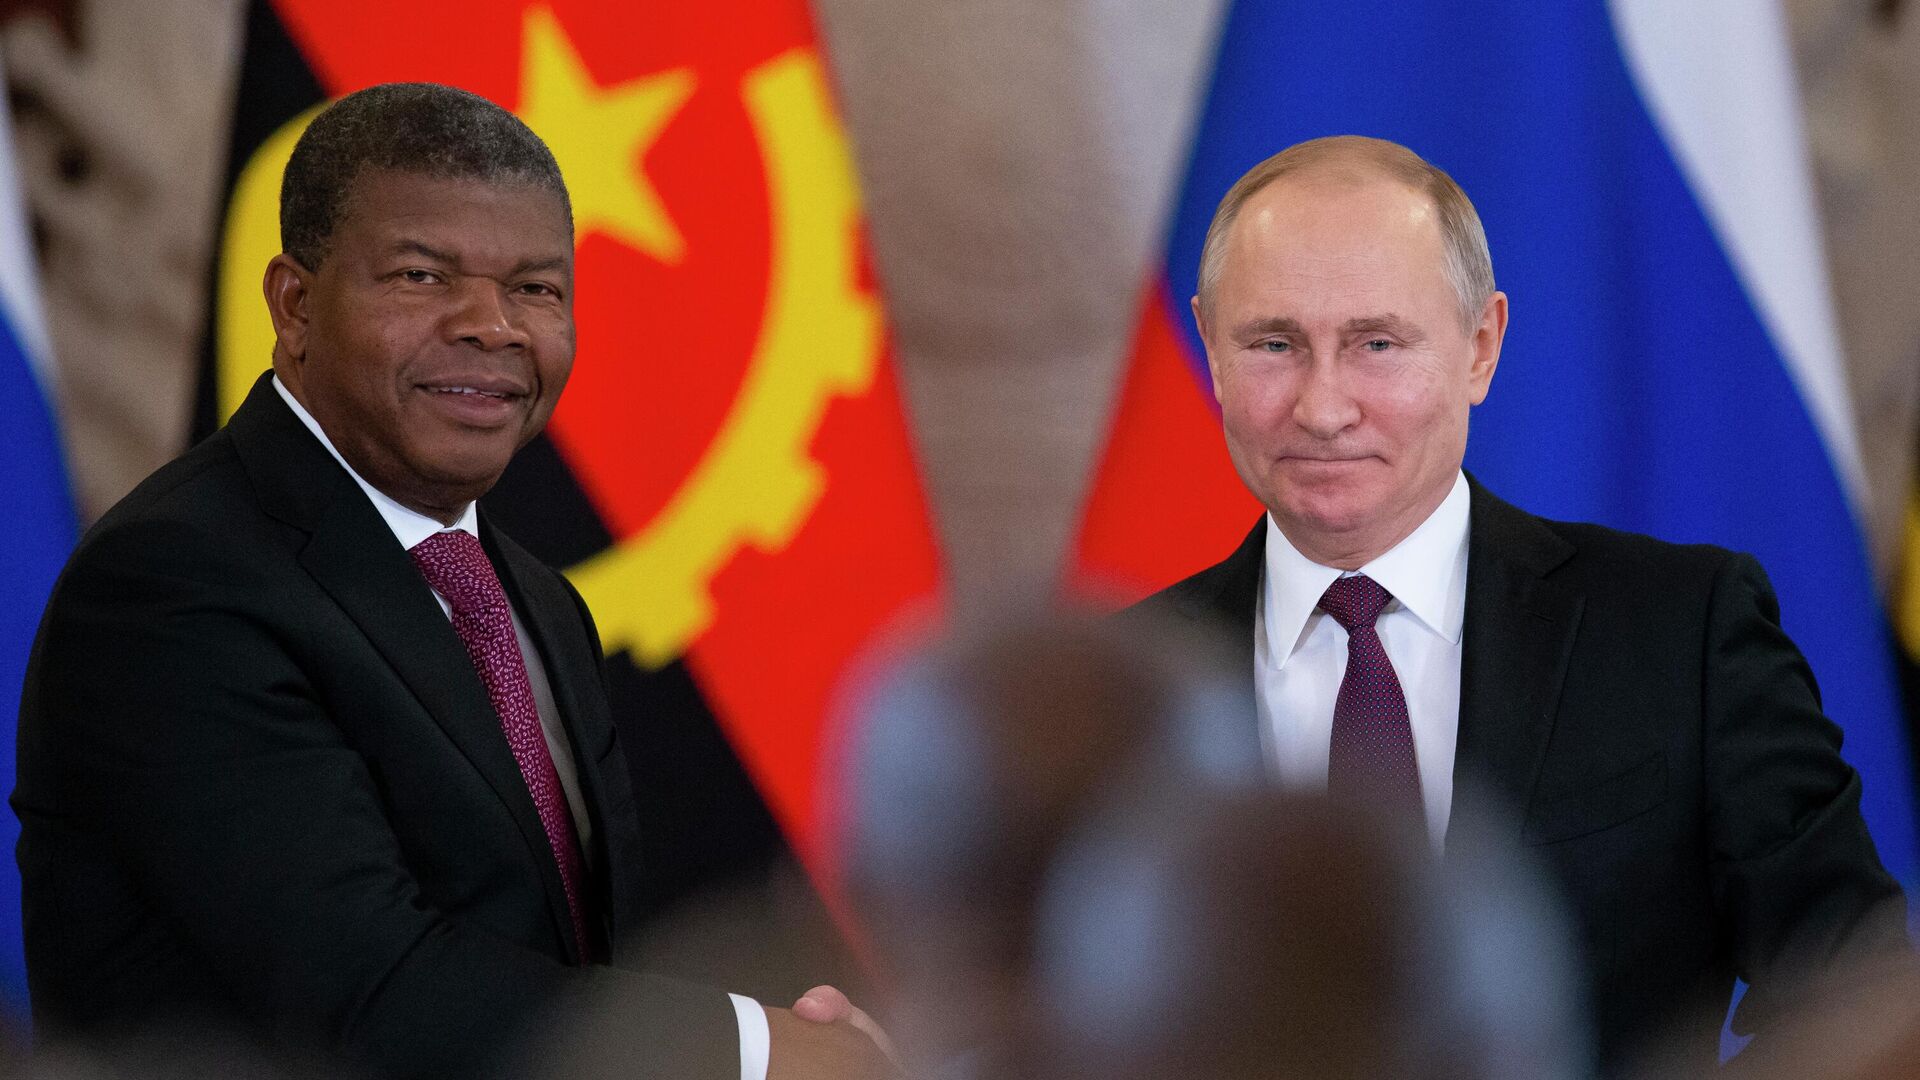 Russian President Vladimir Putin (R) shakes hands with Angola's President Joao Lourenco, after their talks at the Kremlin in Moscow - Sputnik International, 1920, 03.05.2022